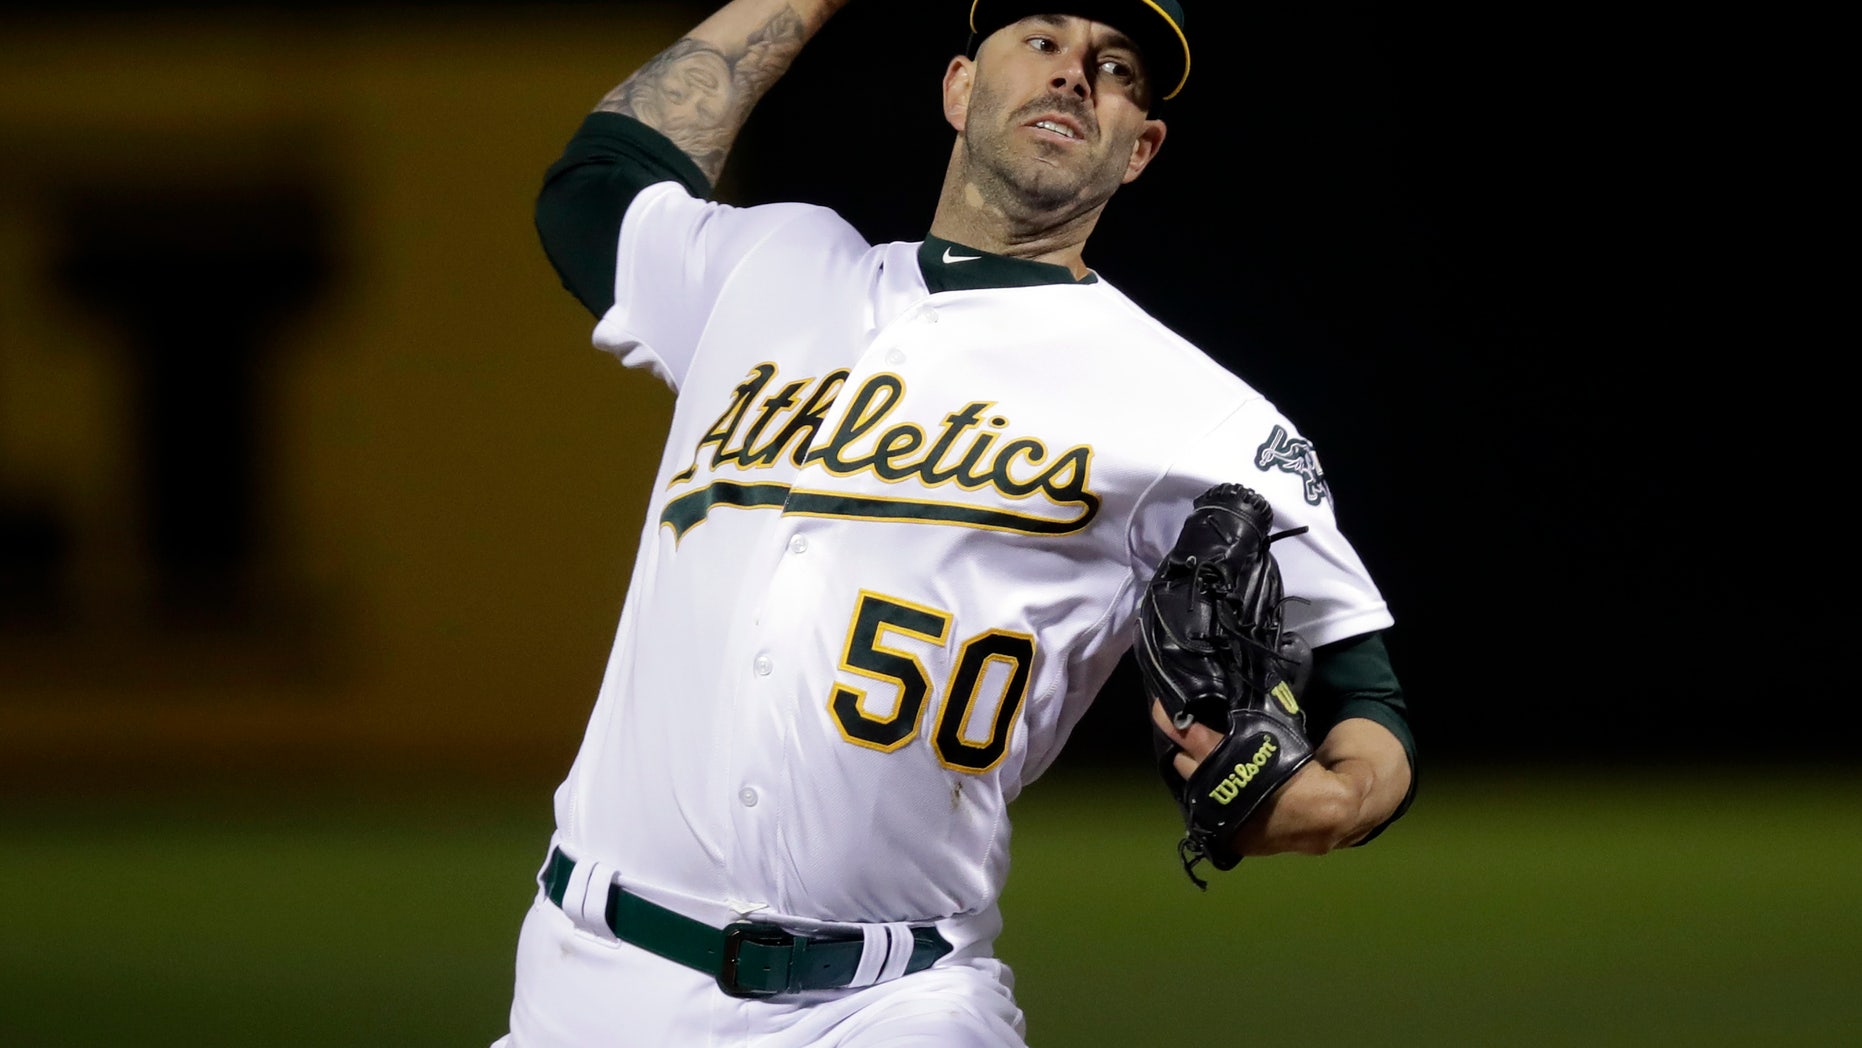 Oakland Athletics pitcher Mike Fiers works against the Cincinnati Reds during the first inning of a baseball game Tuesday, May 7, 2019, in Oakland, Calif. (Associated Press)